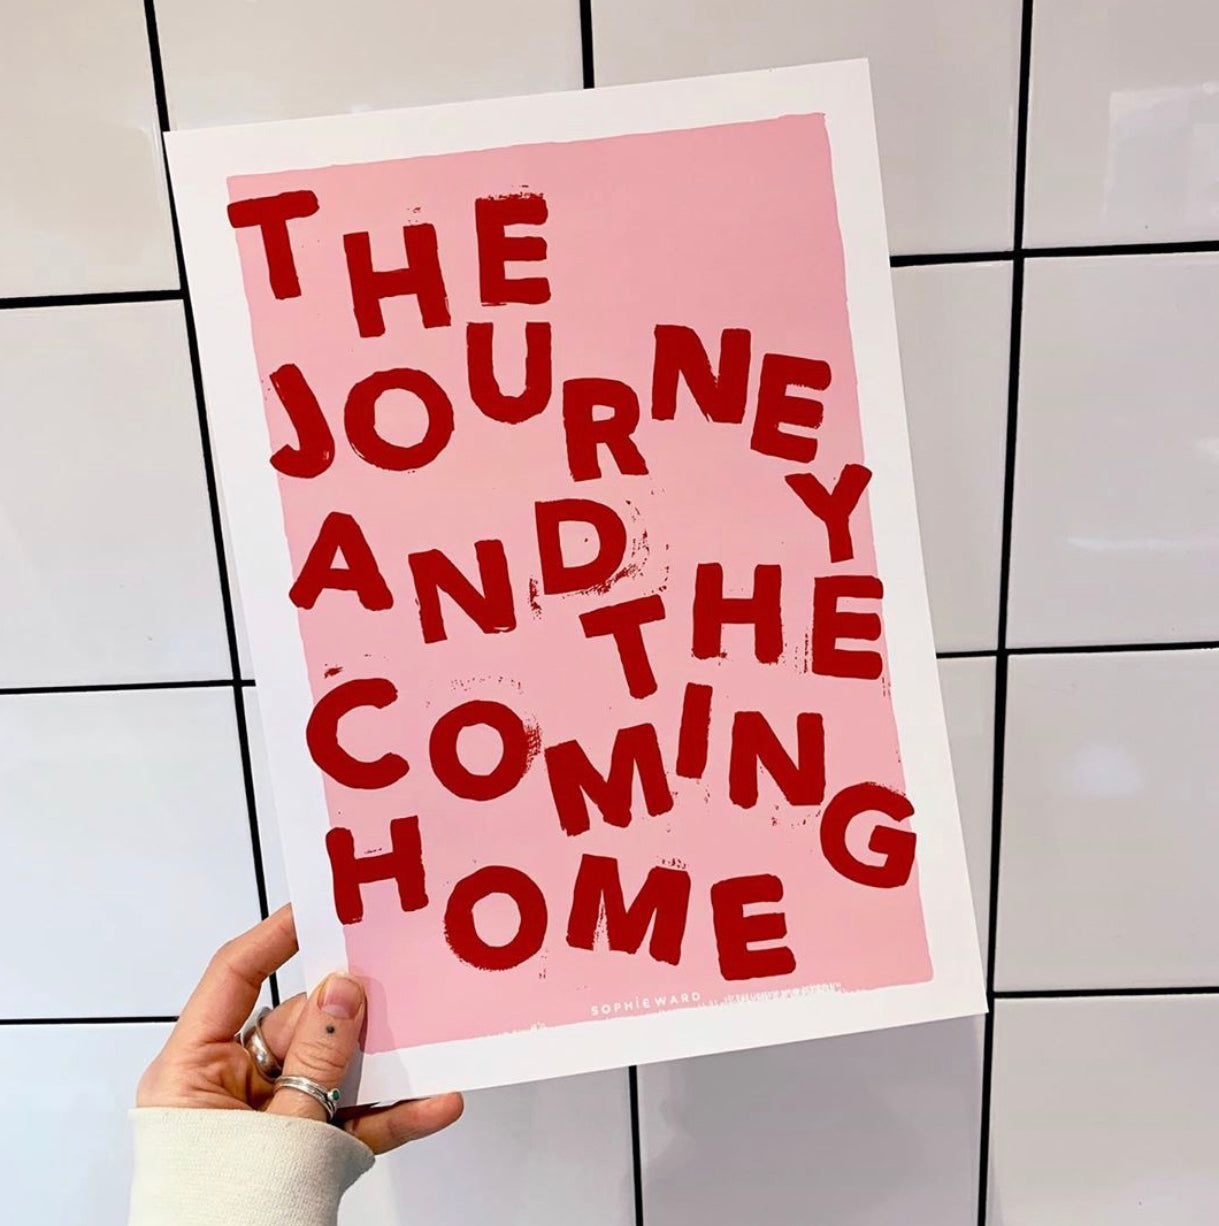 THE JOURNEY...Print in Pink - by Sophie Ward